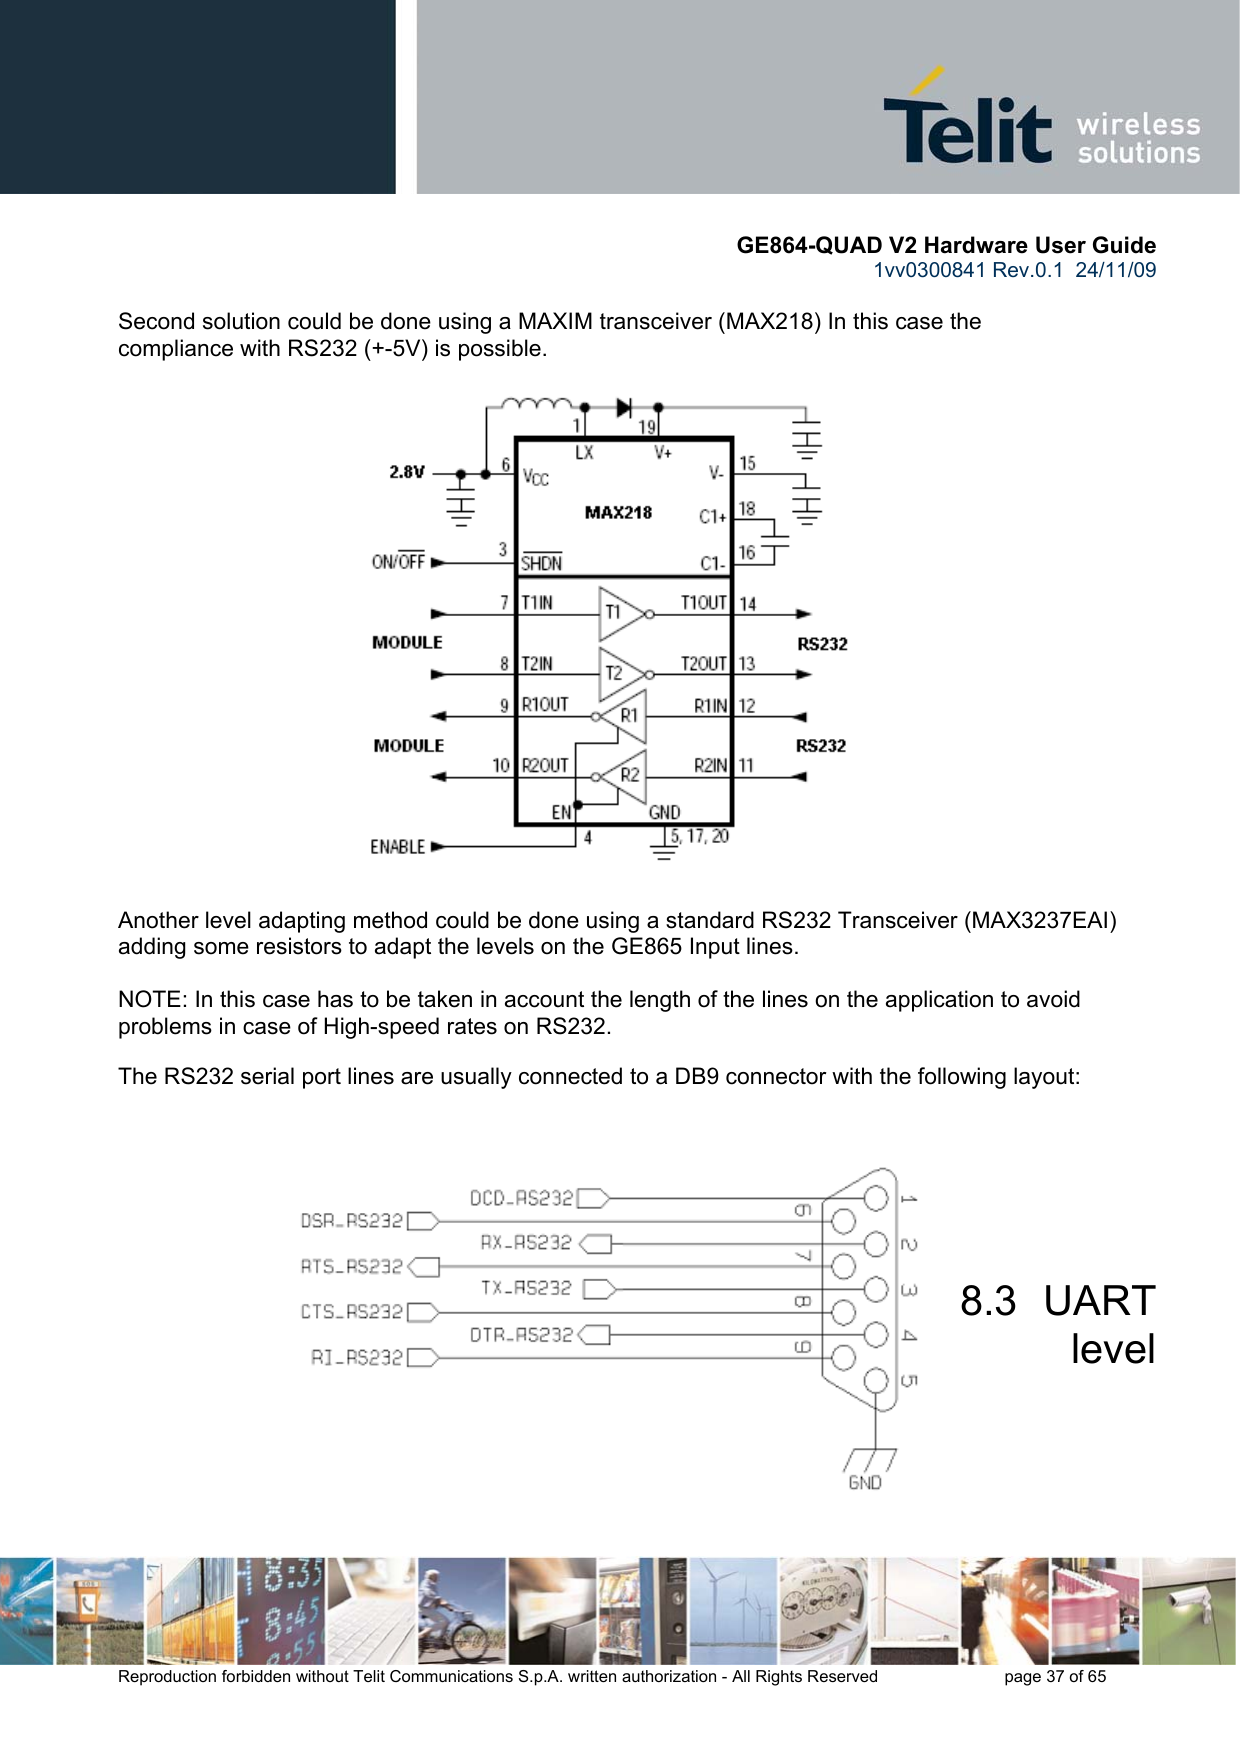       GE864-QUAD V2 Hardware User Guide 1vv0300841 Rev.0.1  24/11/09      Reproduction forbidden without Telit Communications S.p.A. written authorization - All Rights Reserved    page 37 of 65   Second solution could be done using a MAXIM transceiver (MAX218) In this case the compliance with RS232 (+-5V) is possible.                      Another level adapting method could be done using a standard RS232 Transceiver (MAX3237EAI) adding some resistors to adapt the levels on the GE865 Input lines.  NOTE: In this case has to be taken in account the length of the lines on the application to avoid problems in case of High-speed rates on RS232.  The RS232 serial port lines are usually connected to a DB9 connector with the following layout:     8.3  UART level 